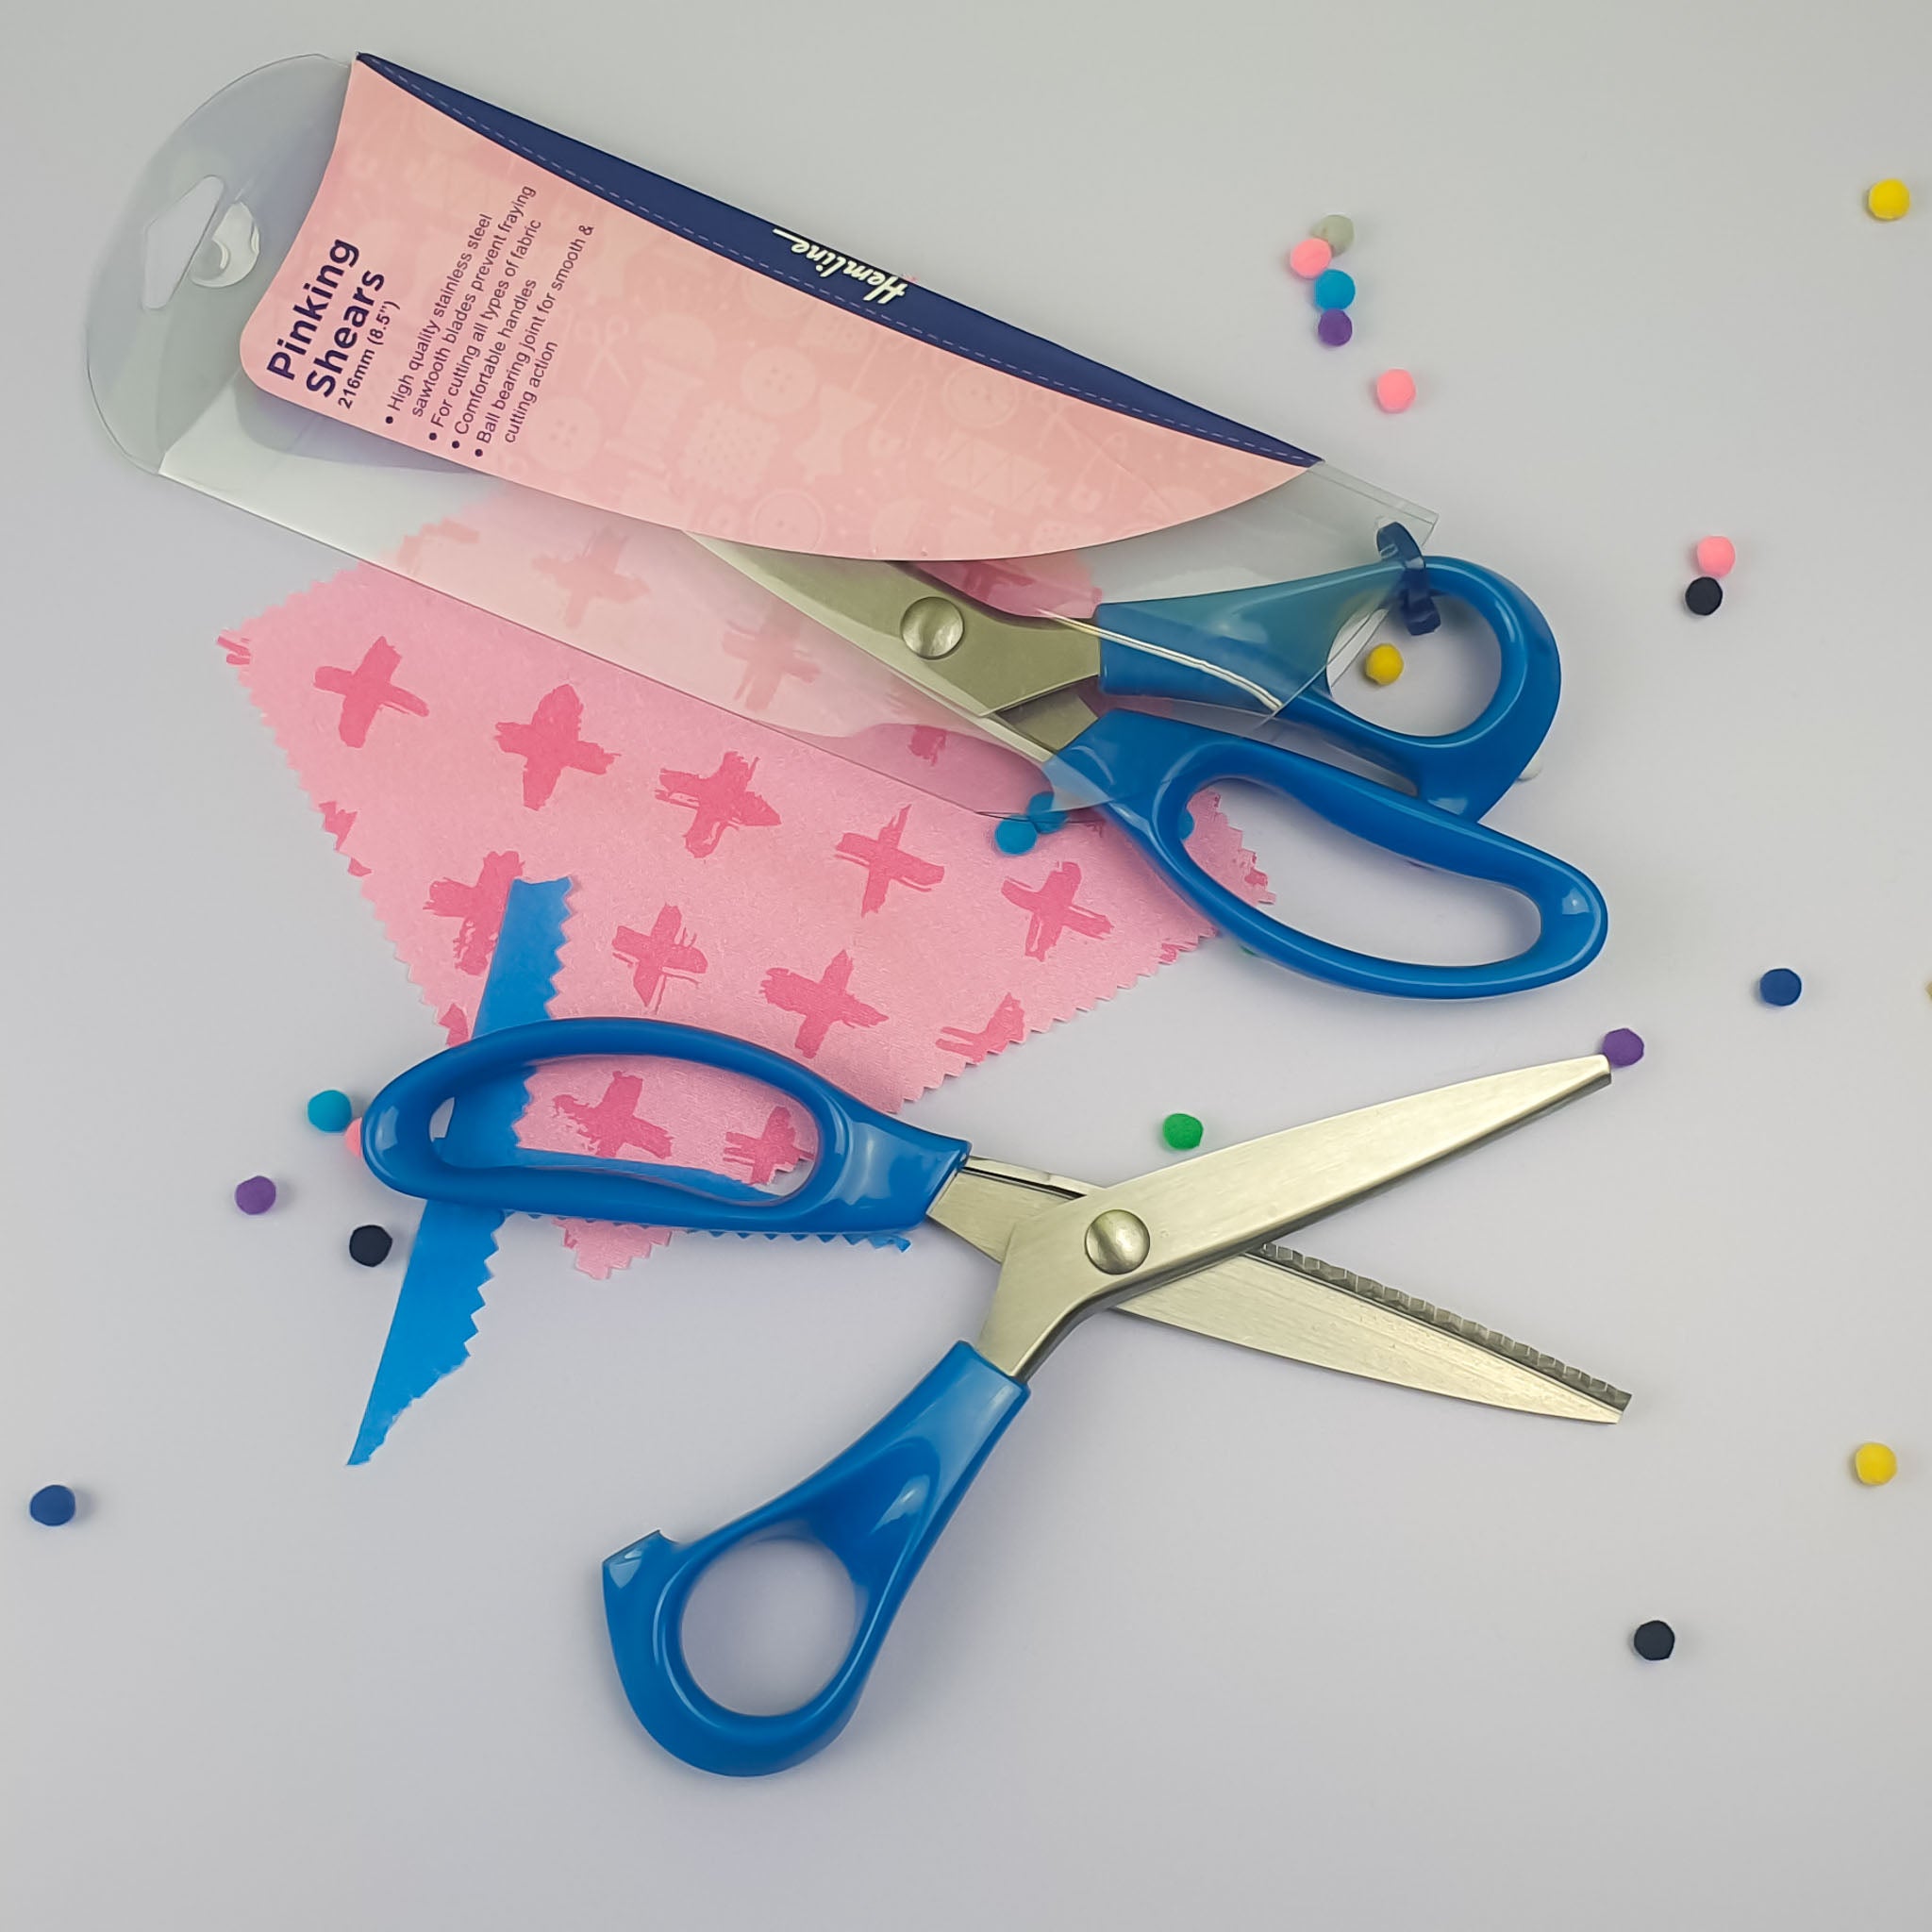 Hemline Pinking Shears with cut fabric and pom poms